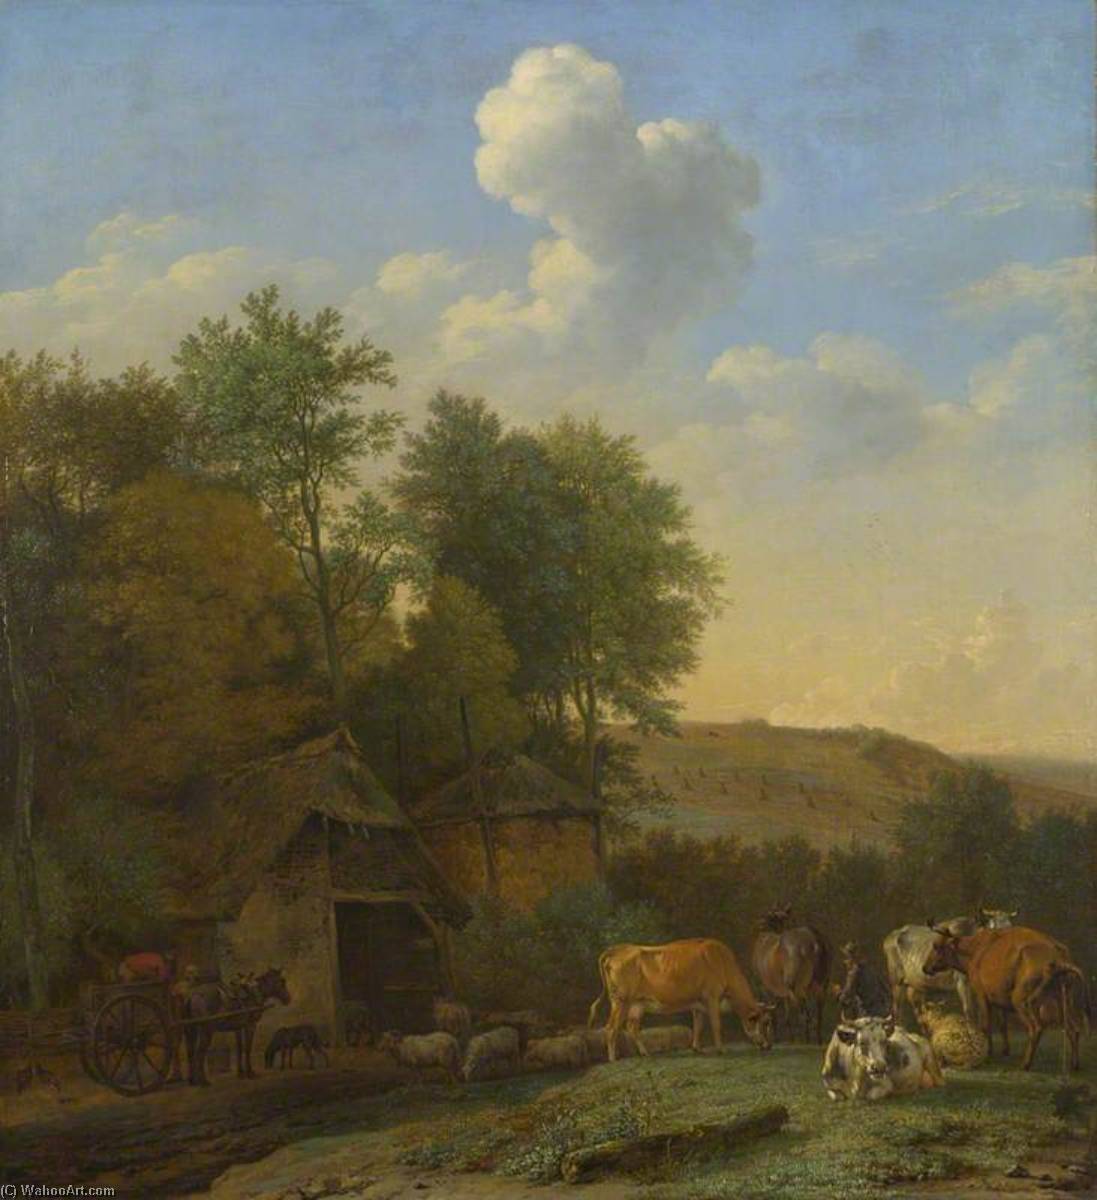 WikiOO.org - Encyclopedia of Fine Arts - Lukisan, Artwork Paulus Potter - A Landscape with Cows, Sheep and Horses by a Barn